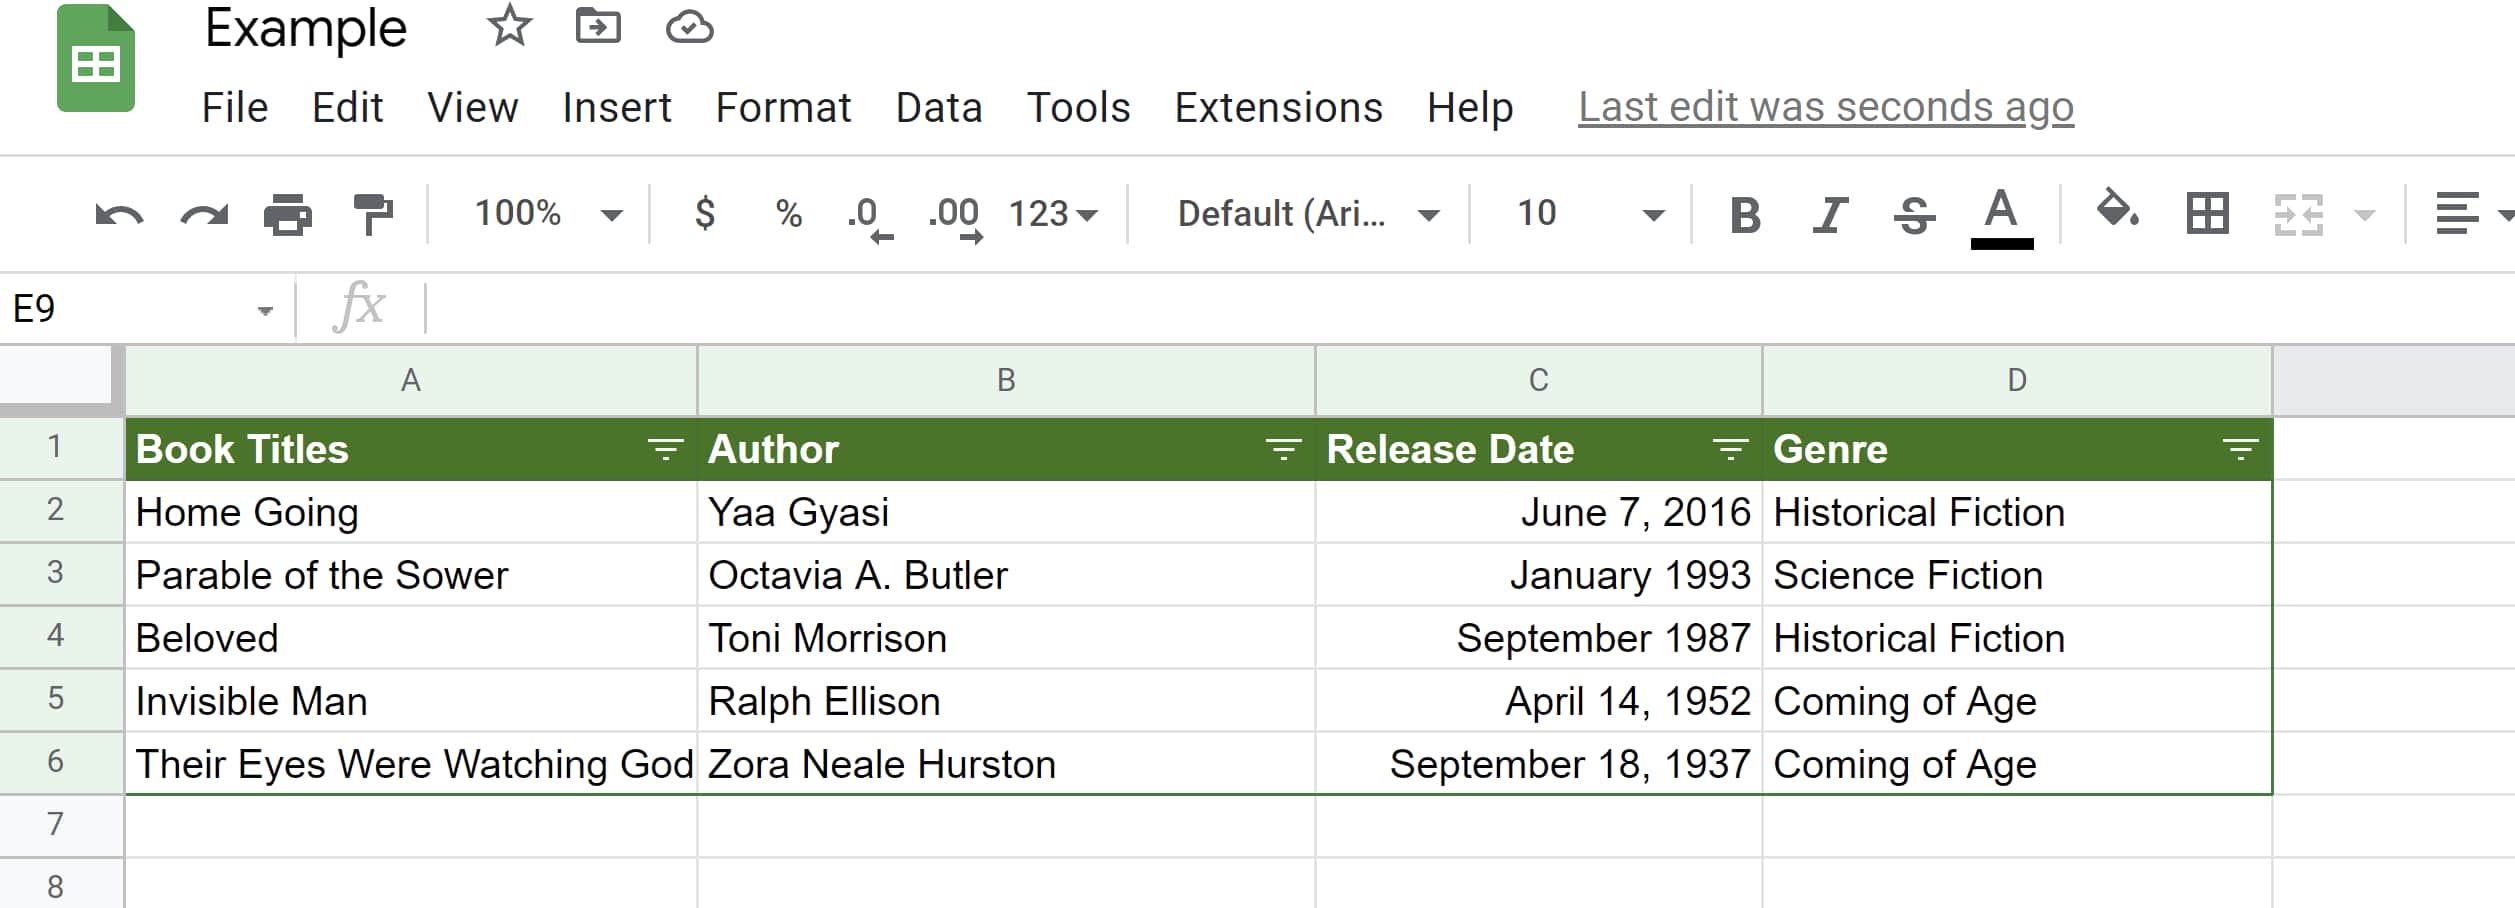 Filters created for columns in Google Sheets charts